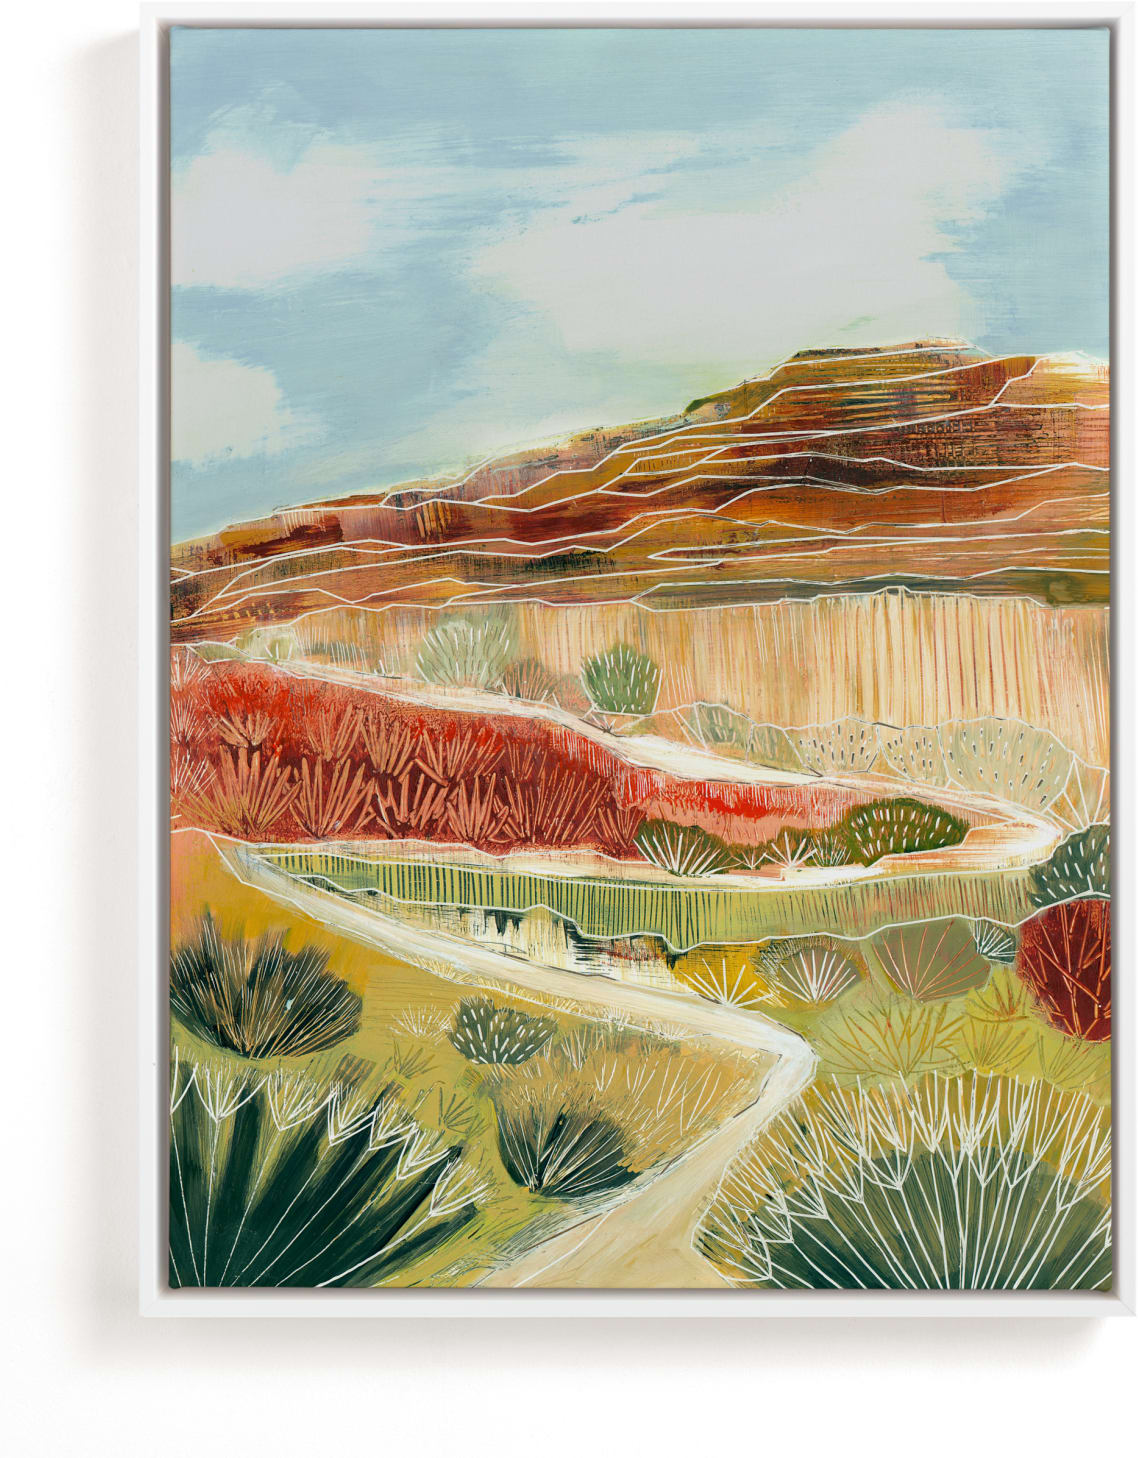 This is a brown art by Sarah Fitzgerald called Ancient Desert Path.